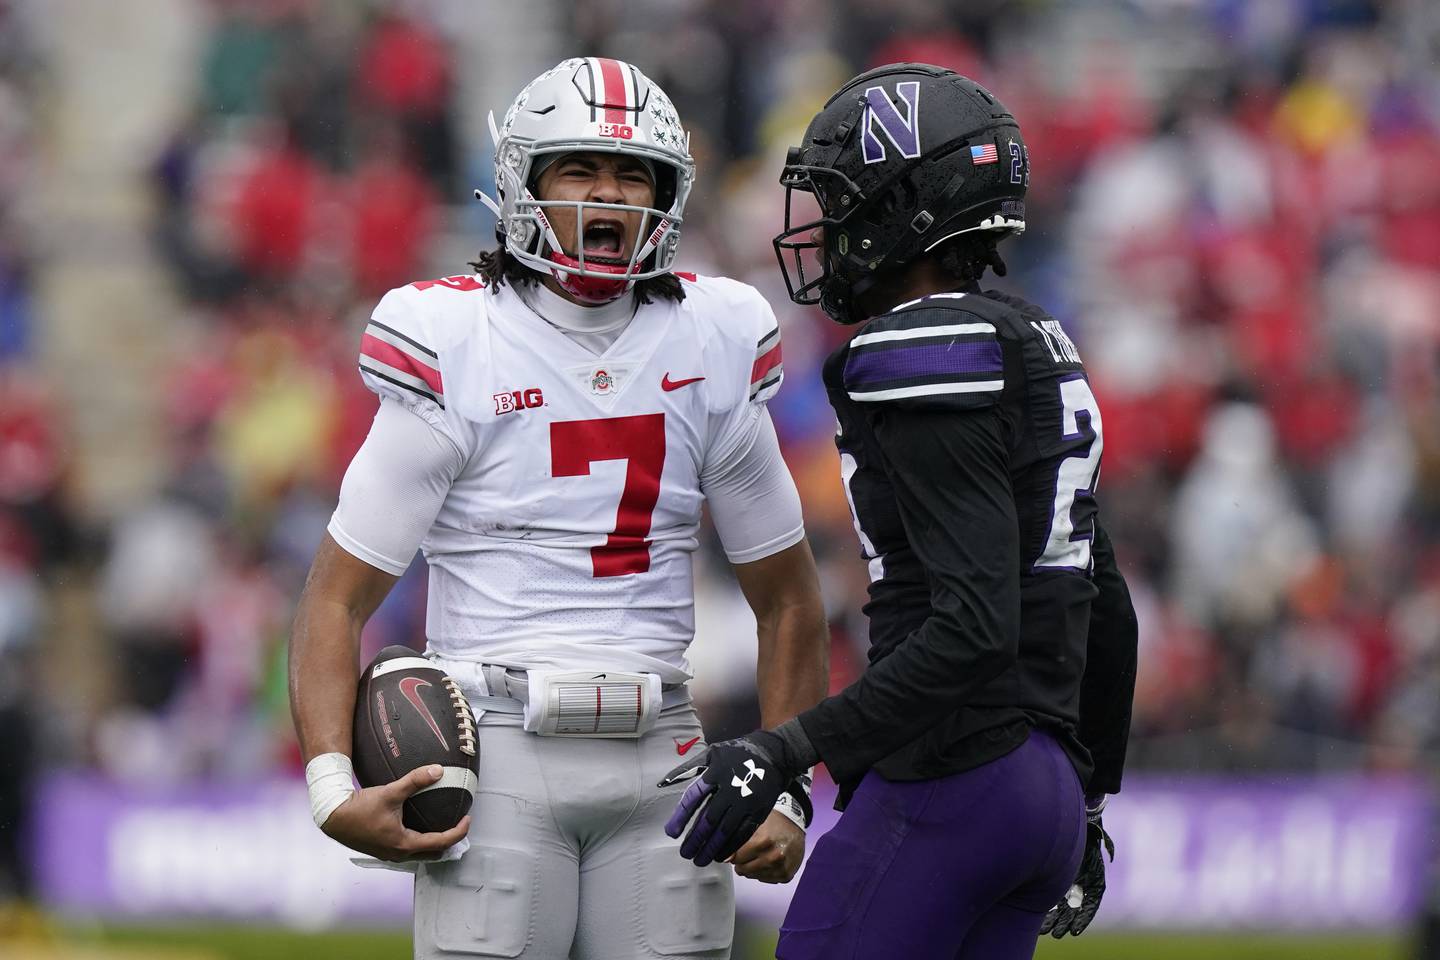 Ohio State quarterback C.J. Stroud, left, reacts in front of Northwestern defensive back Jack Oyola after a long run on Saturday in Evanston, Illinois.